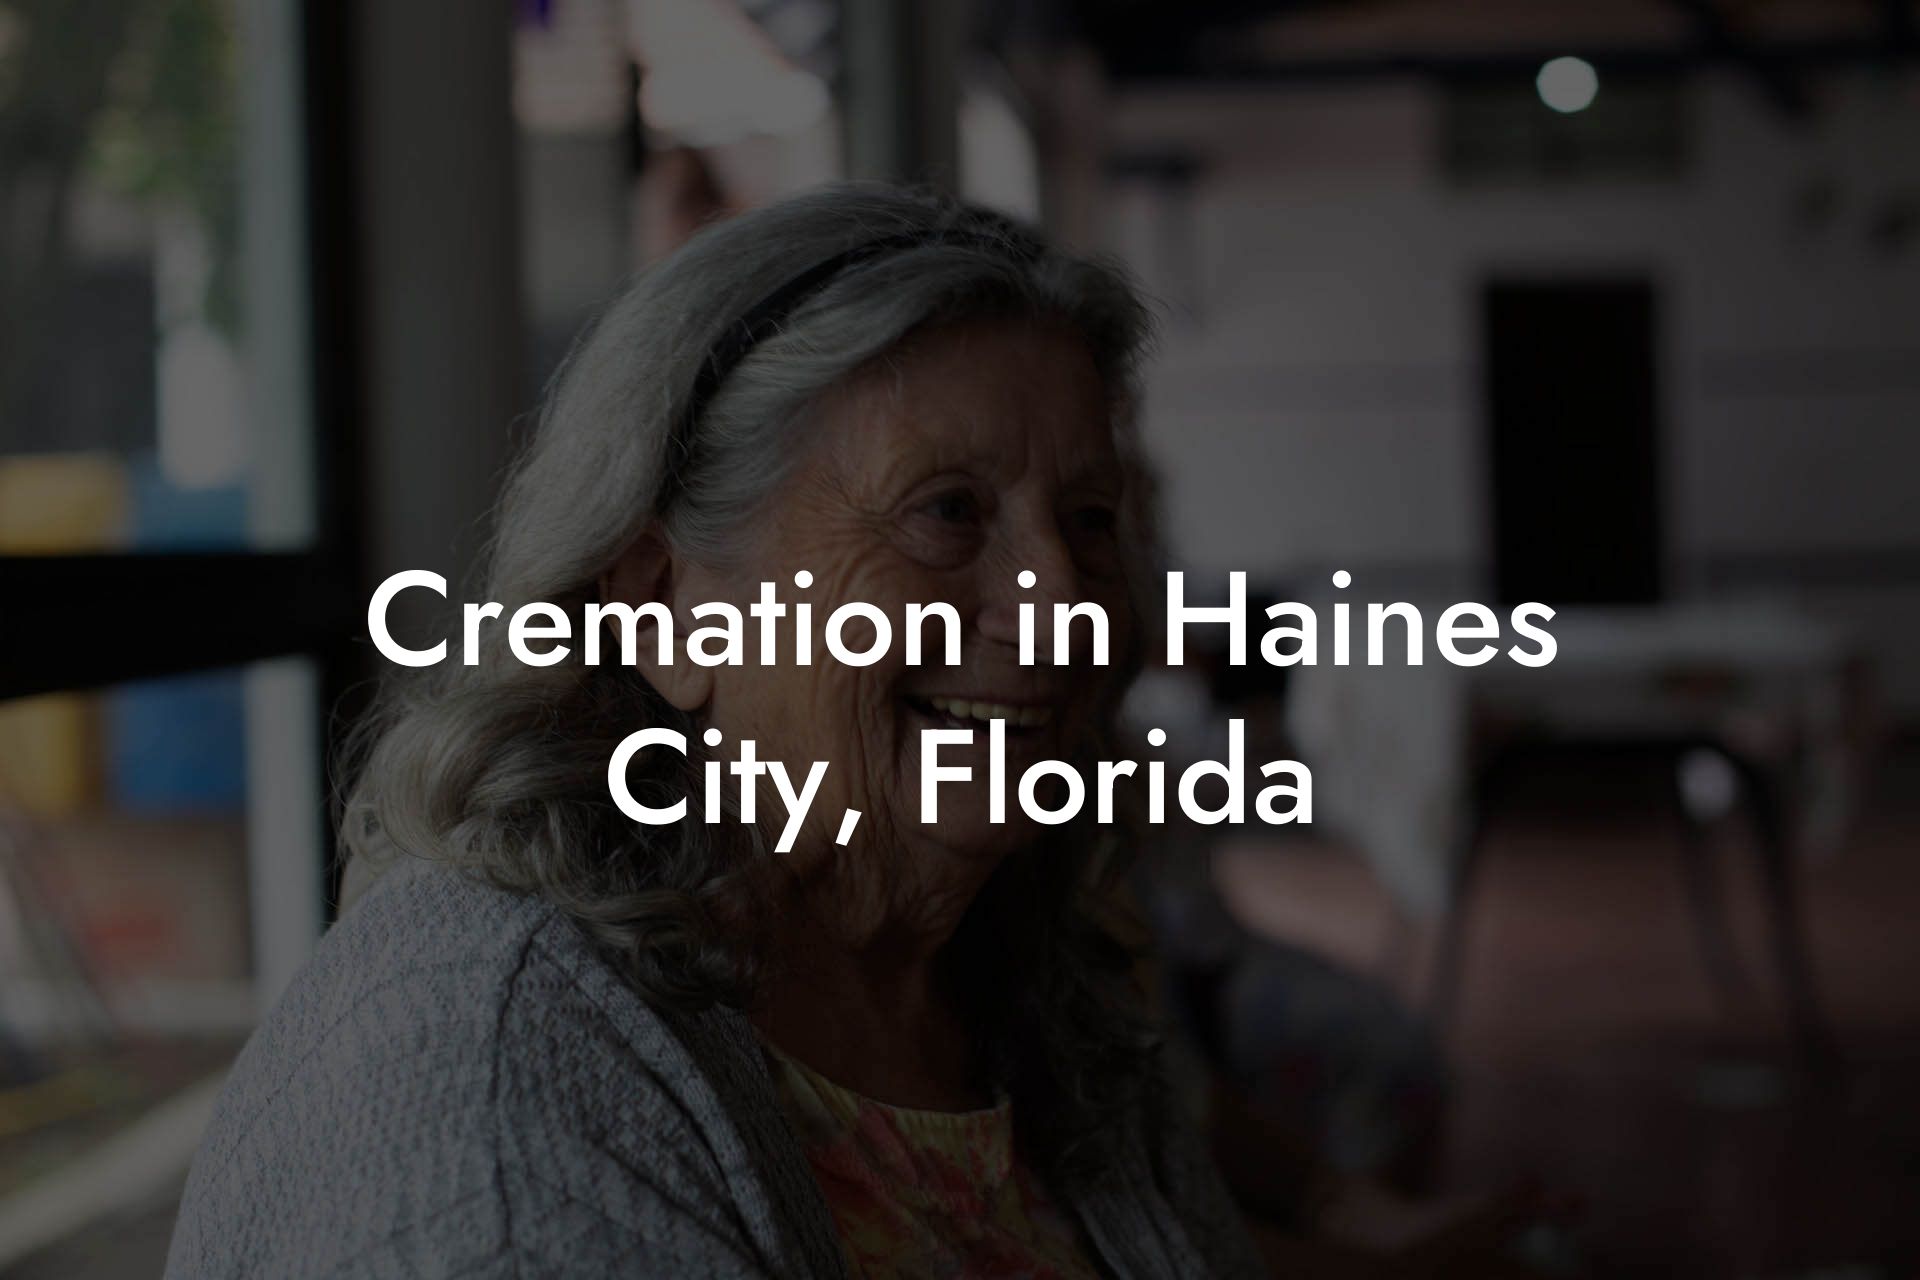 Cremation in Haines City, Florida